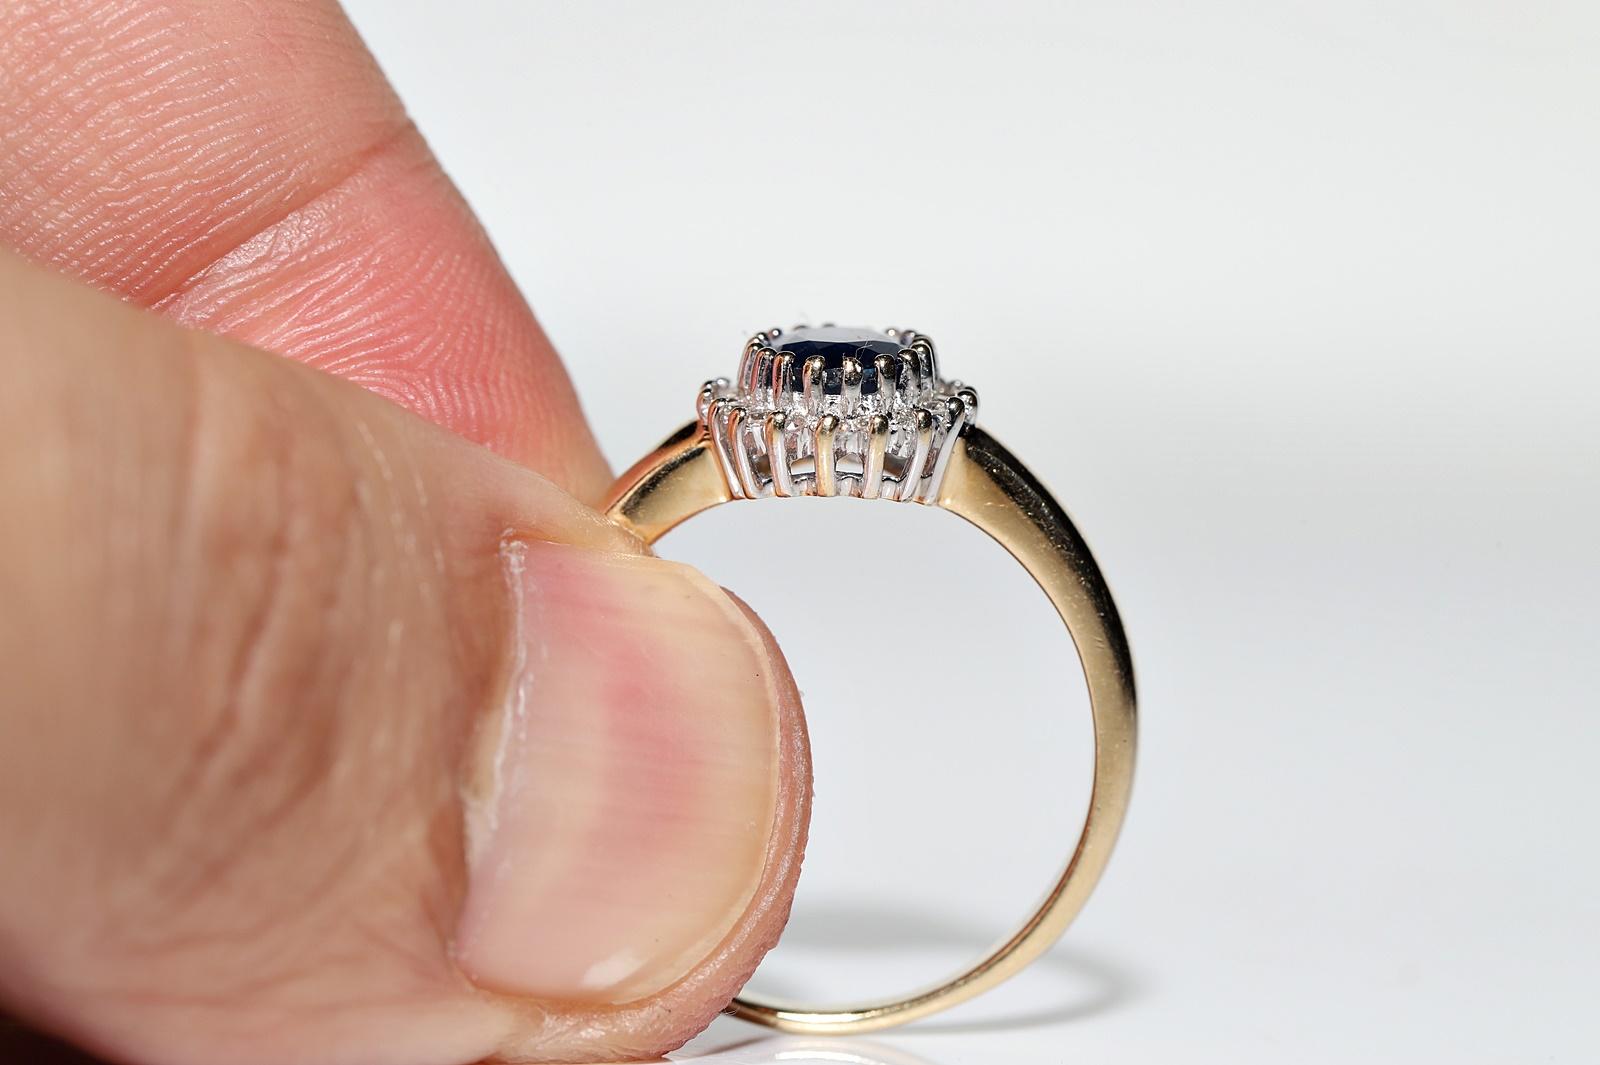 Vintage Circa 1980s 14k Gold Natural Diamond And Sapphire Decorated Ring  For Sale 3